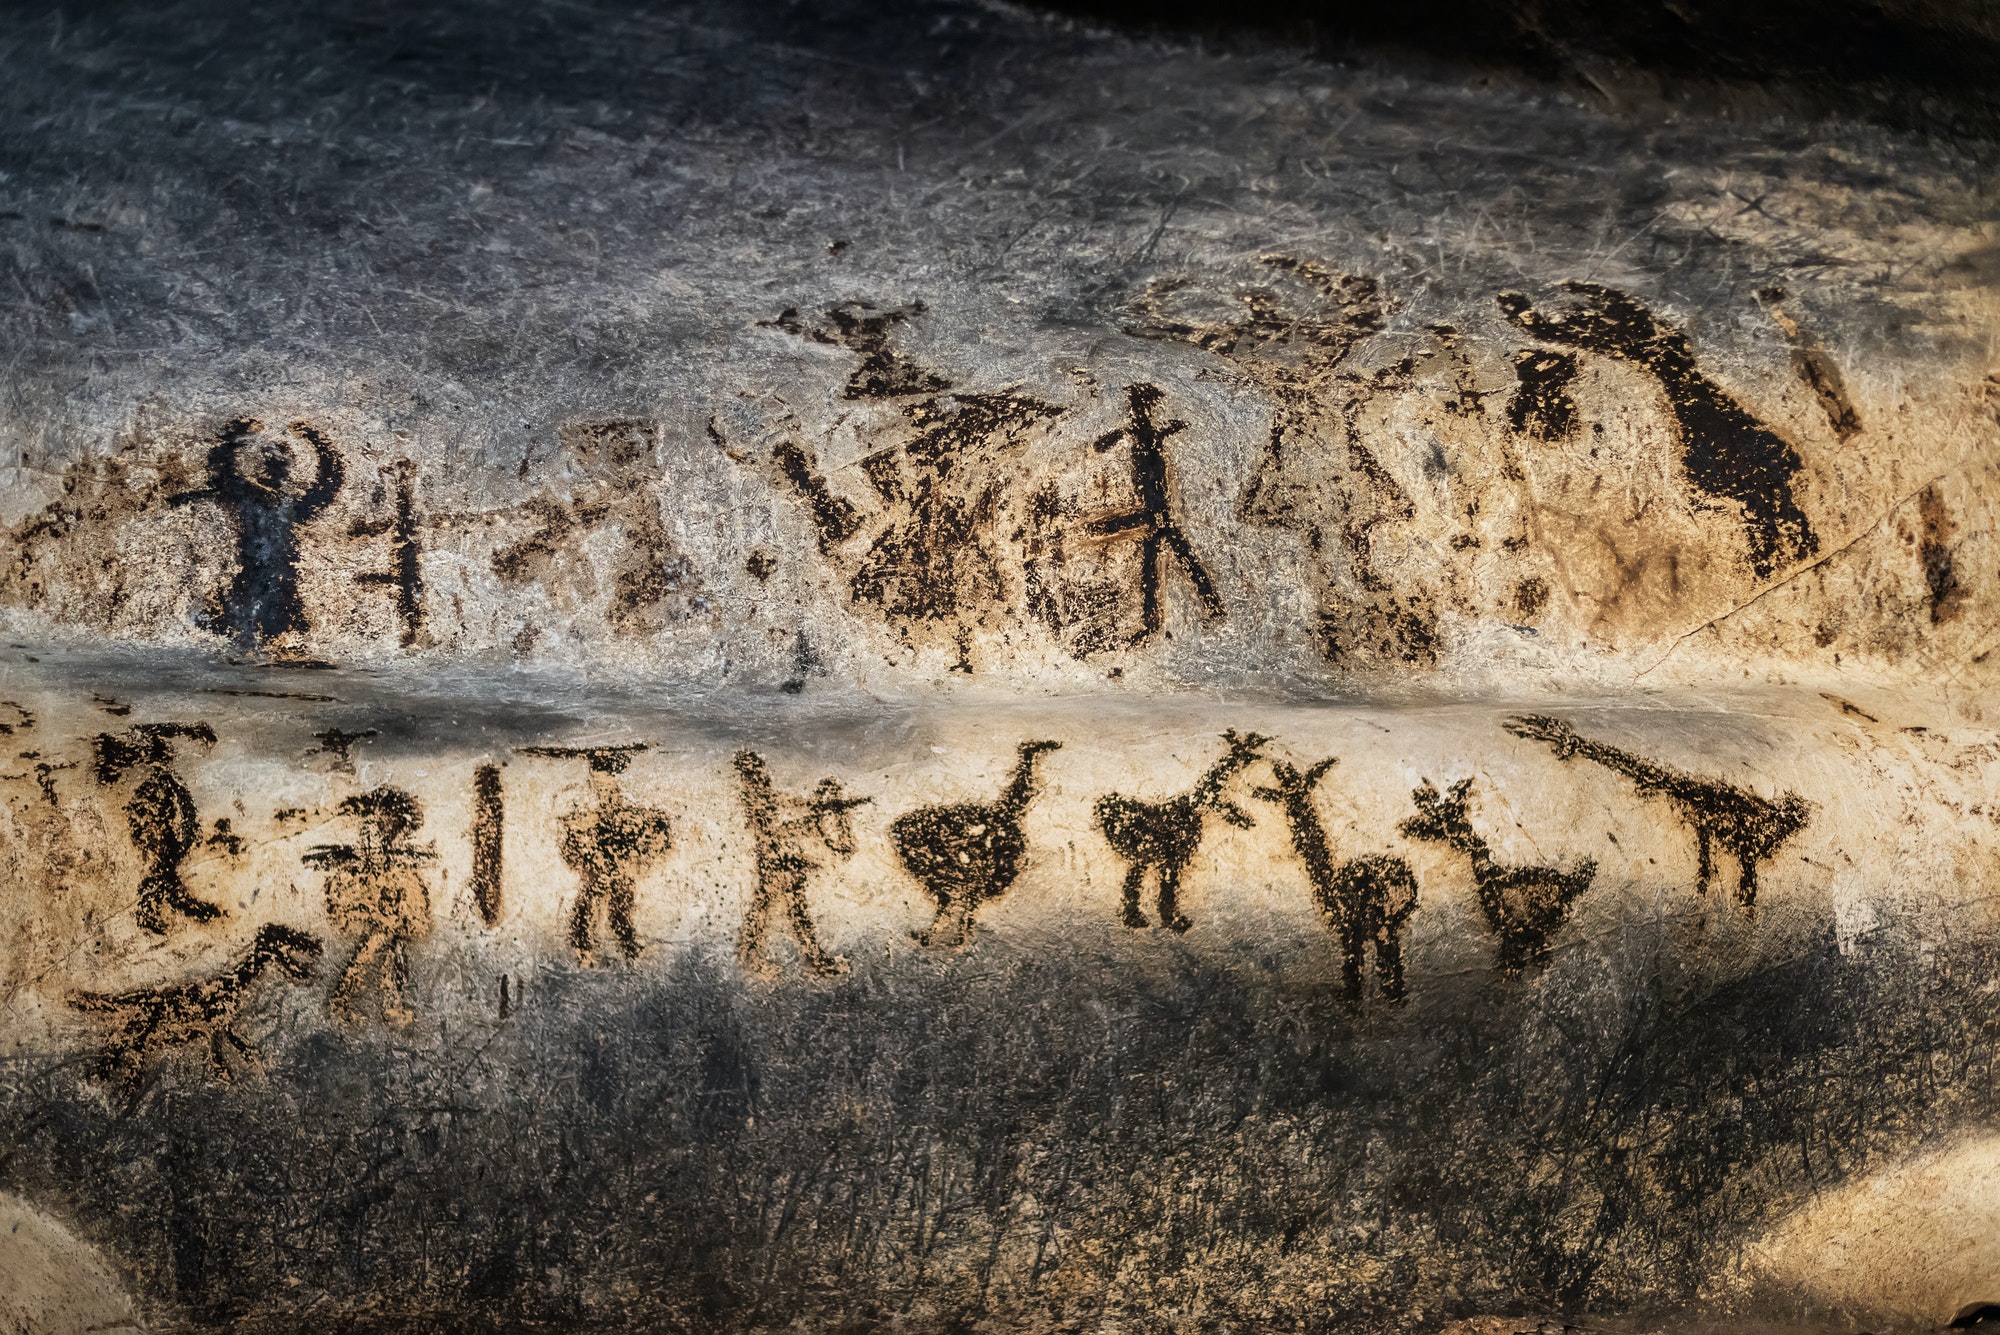 Ancient cave drawings